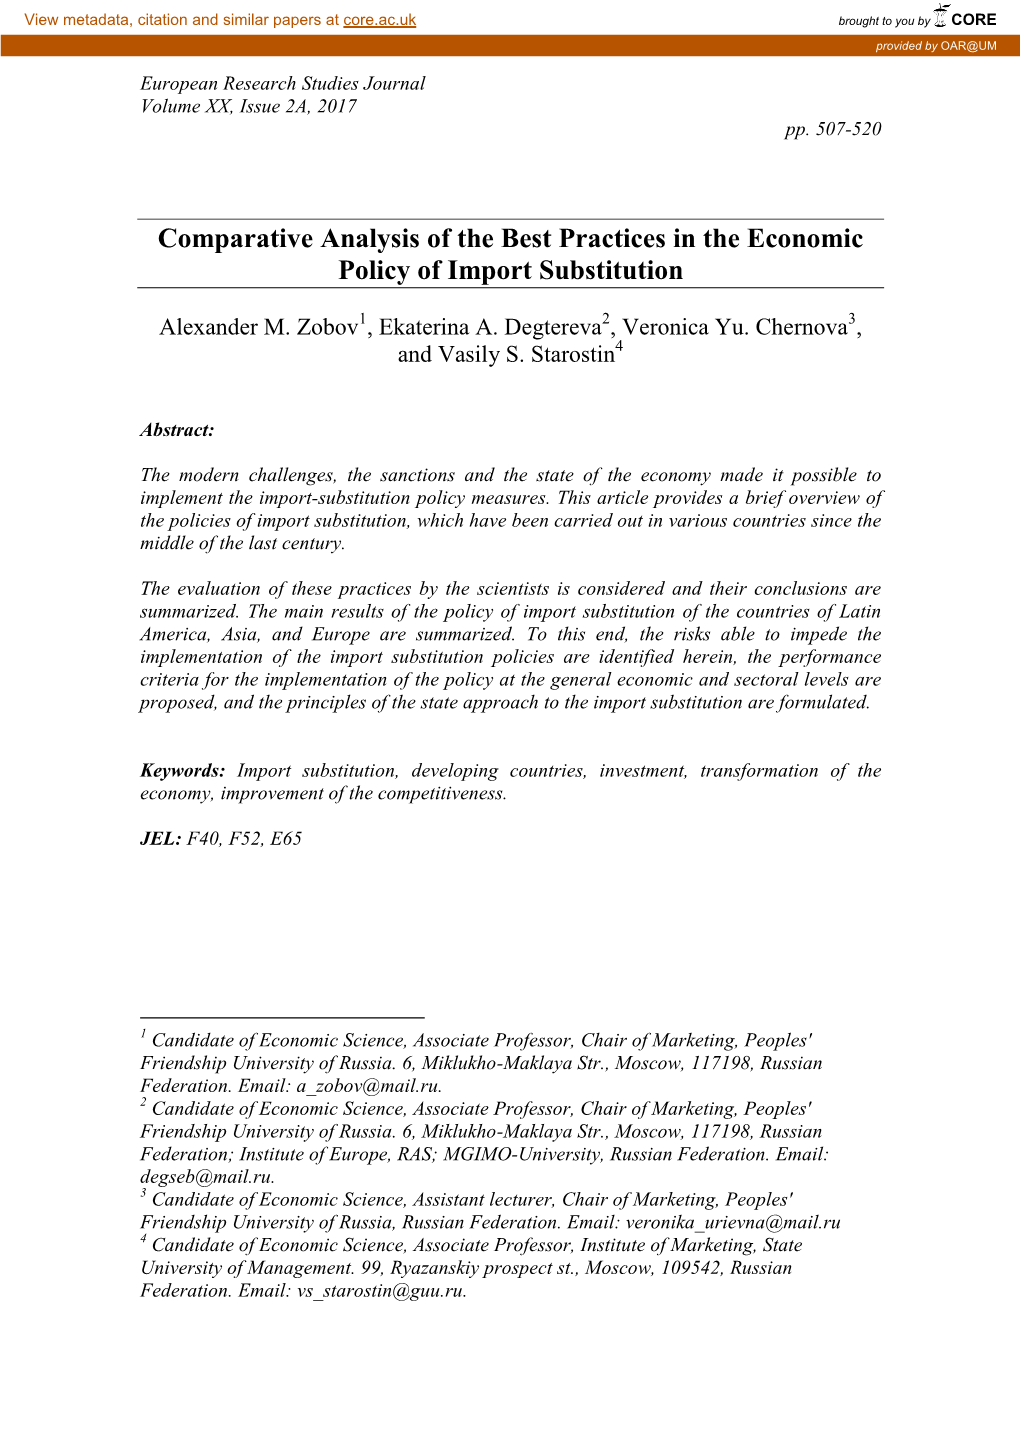 Comparative Analysis of the Best Practices in the Economic Policy of Import Substitution